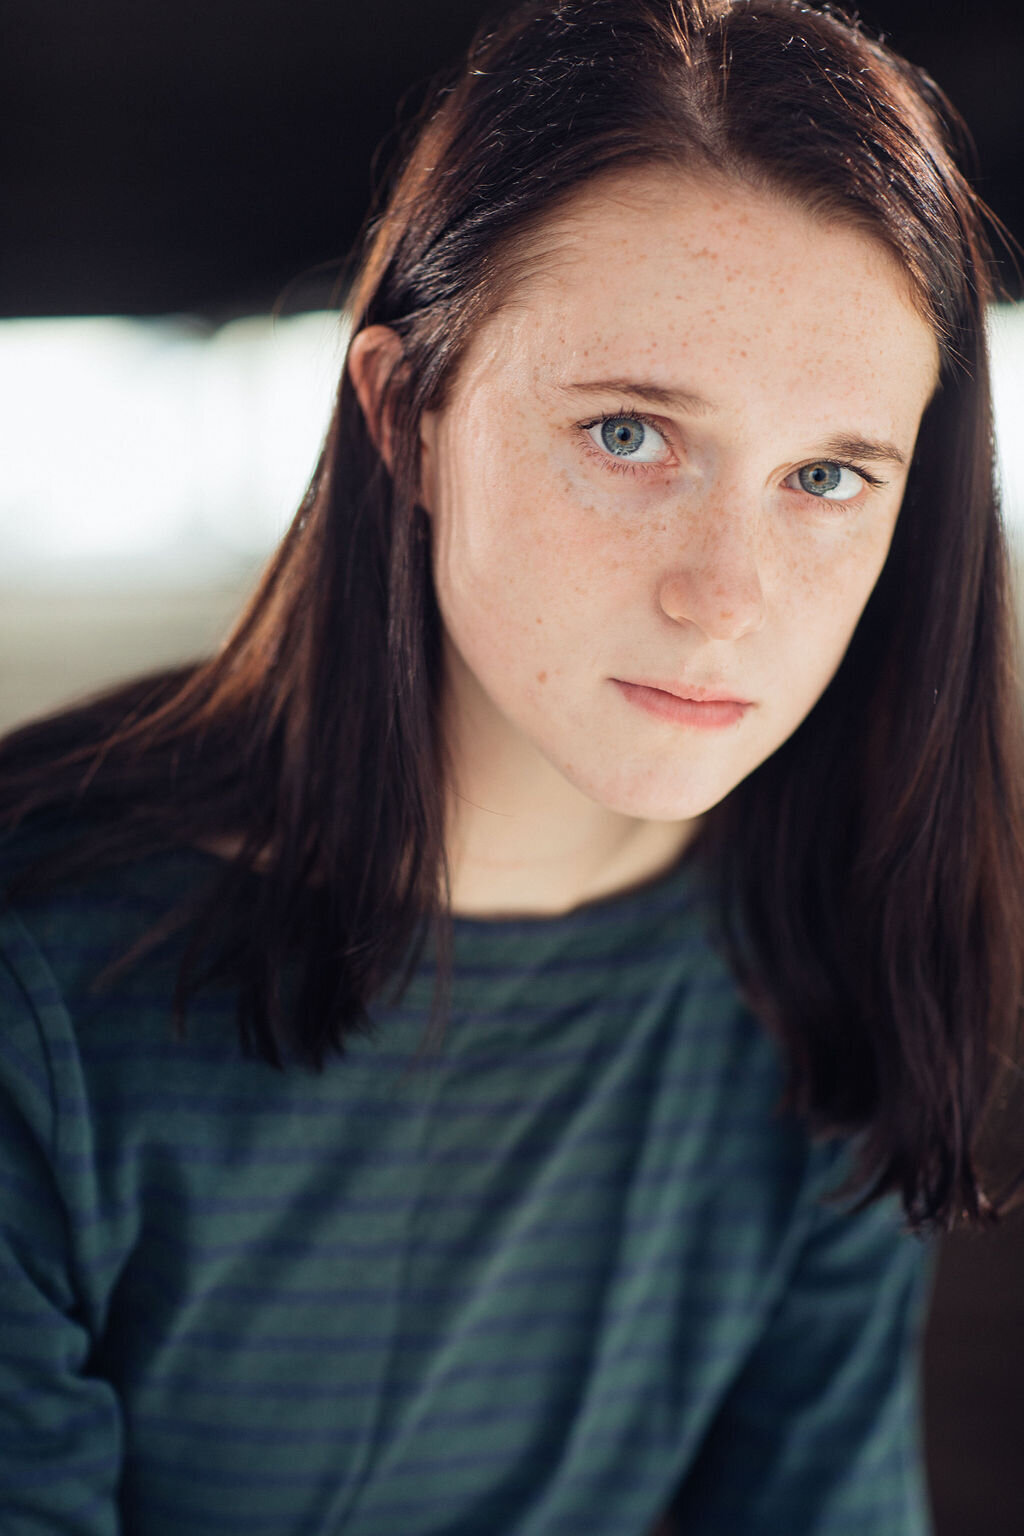 Headshot Photograph Of Young Woman In Striped Blue Long Sleeves Los Angeles